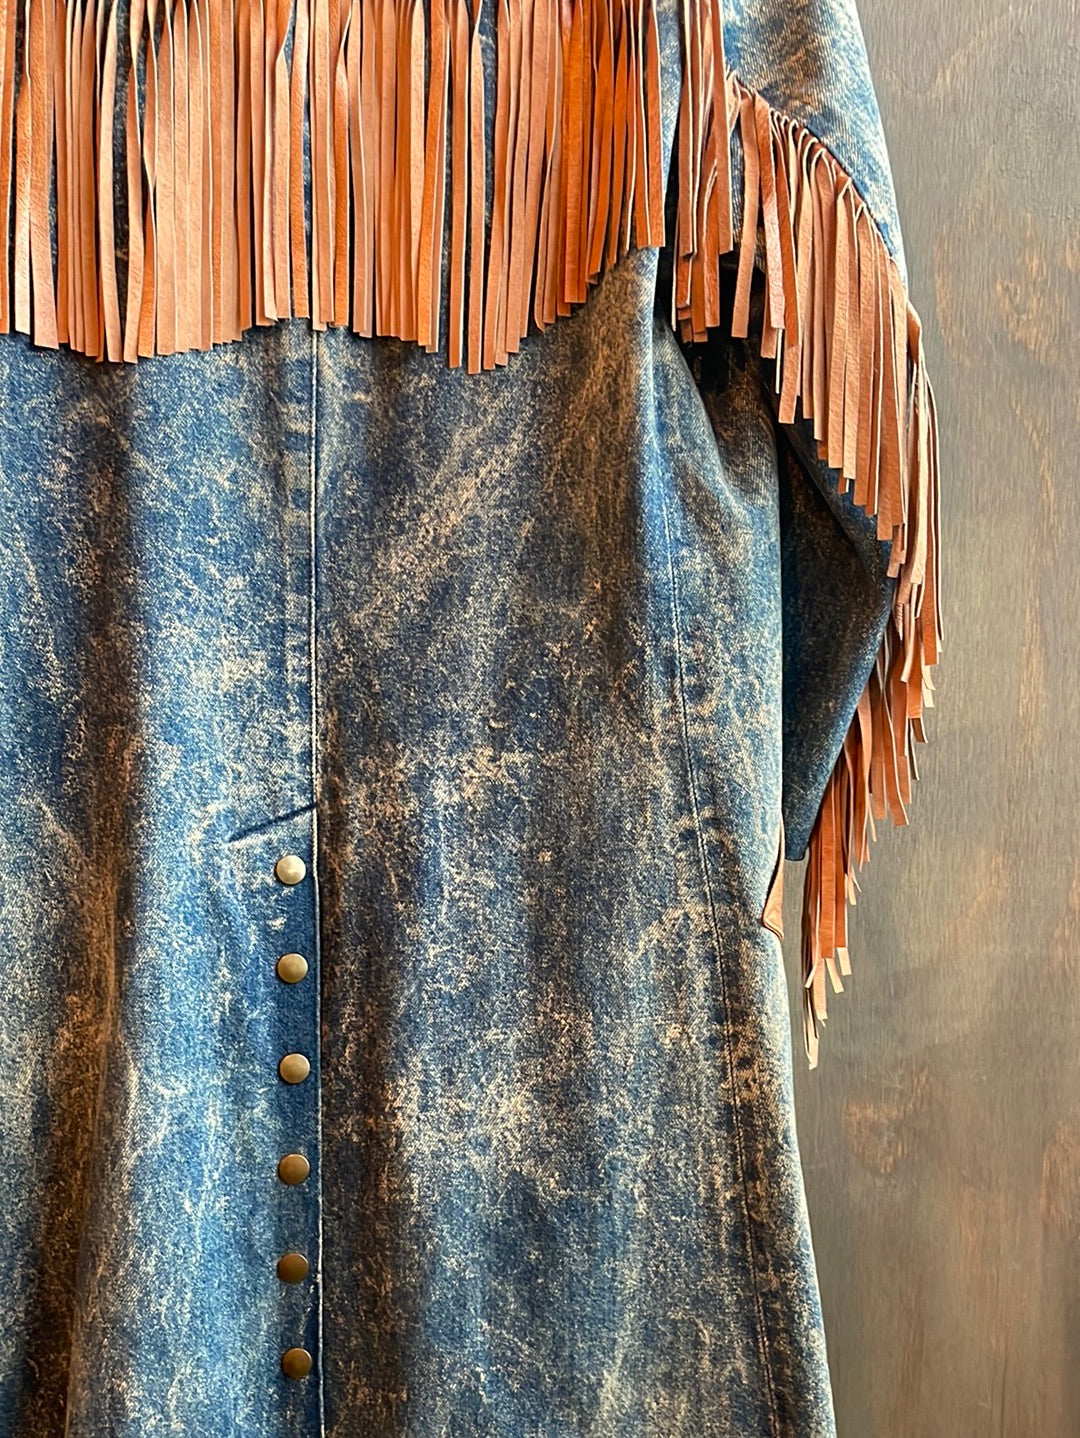 Vintage Diamond Denim and Leather Duster with Fringe